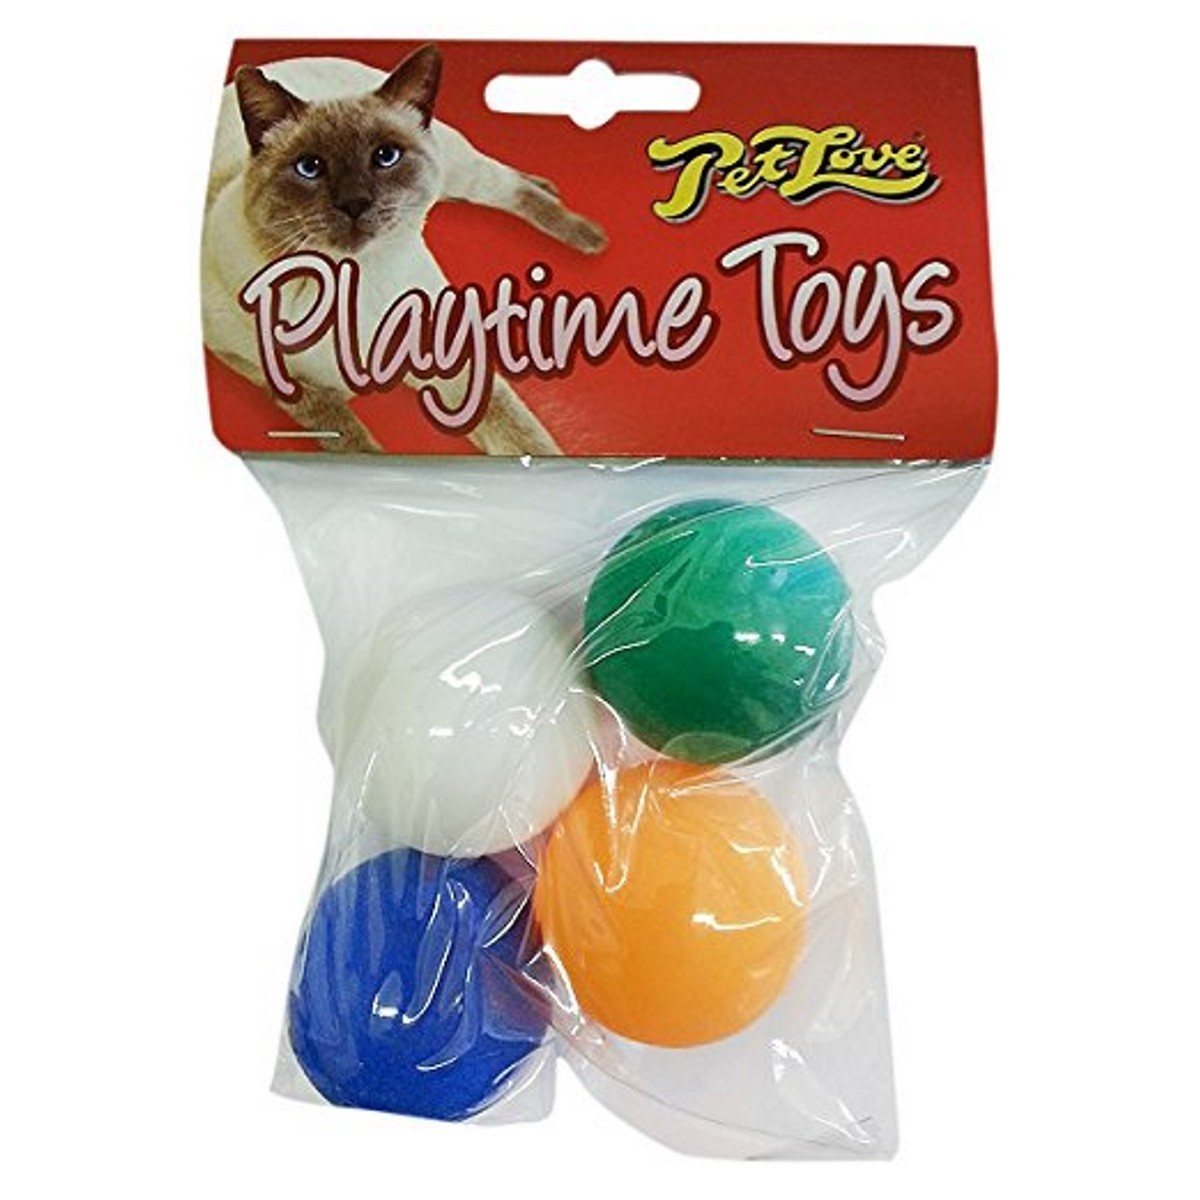 cat toys that cats love